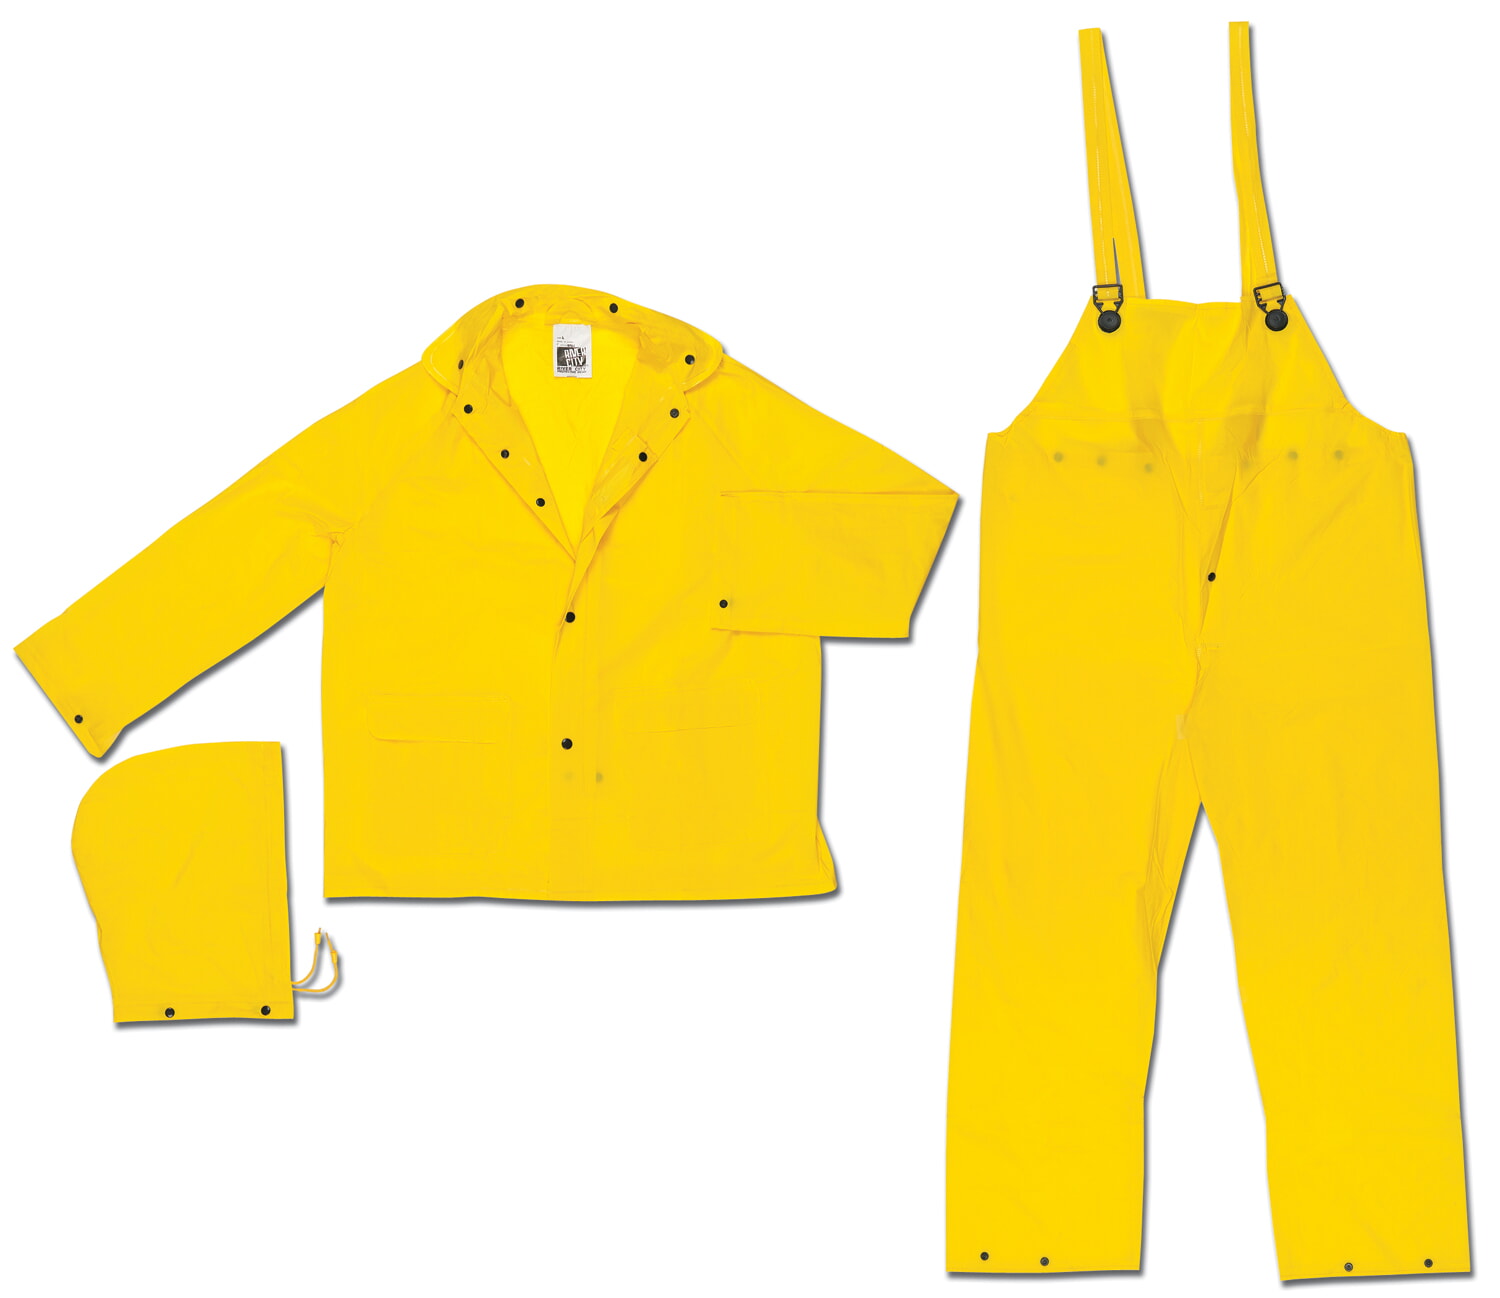 MCR Safety .20mm Squall 3 piece Yellow PVC suit with Detachable Hood, Snap Front Jacket & Bib Pant from Columbia Safety